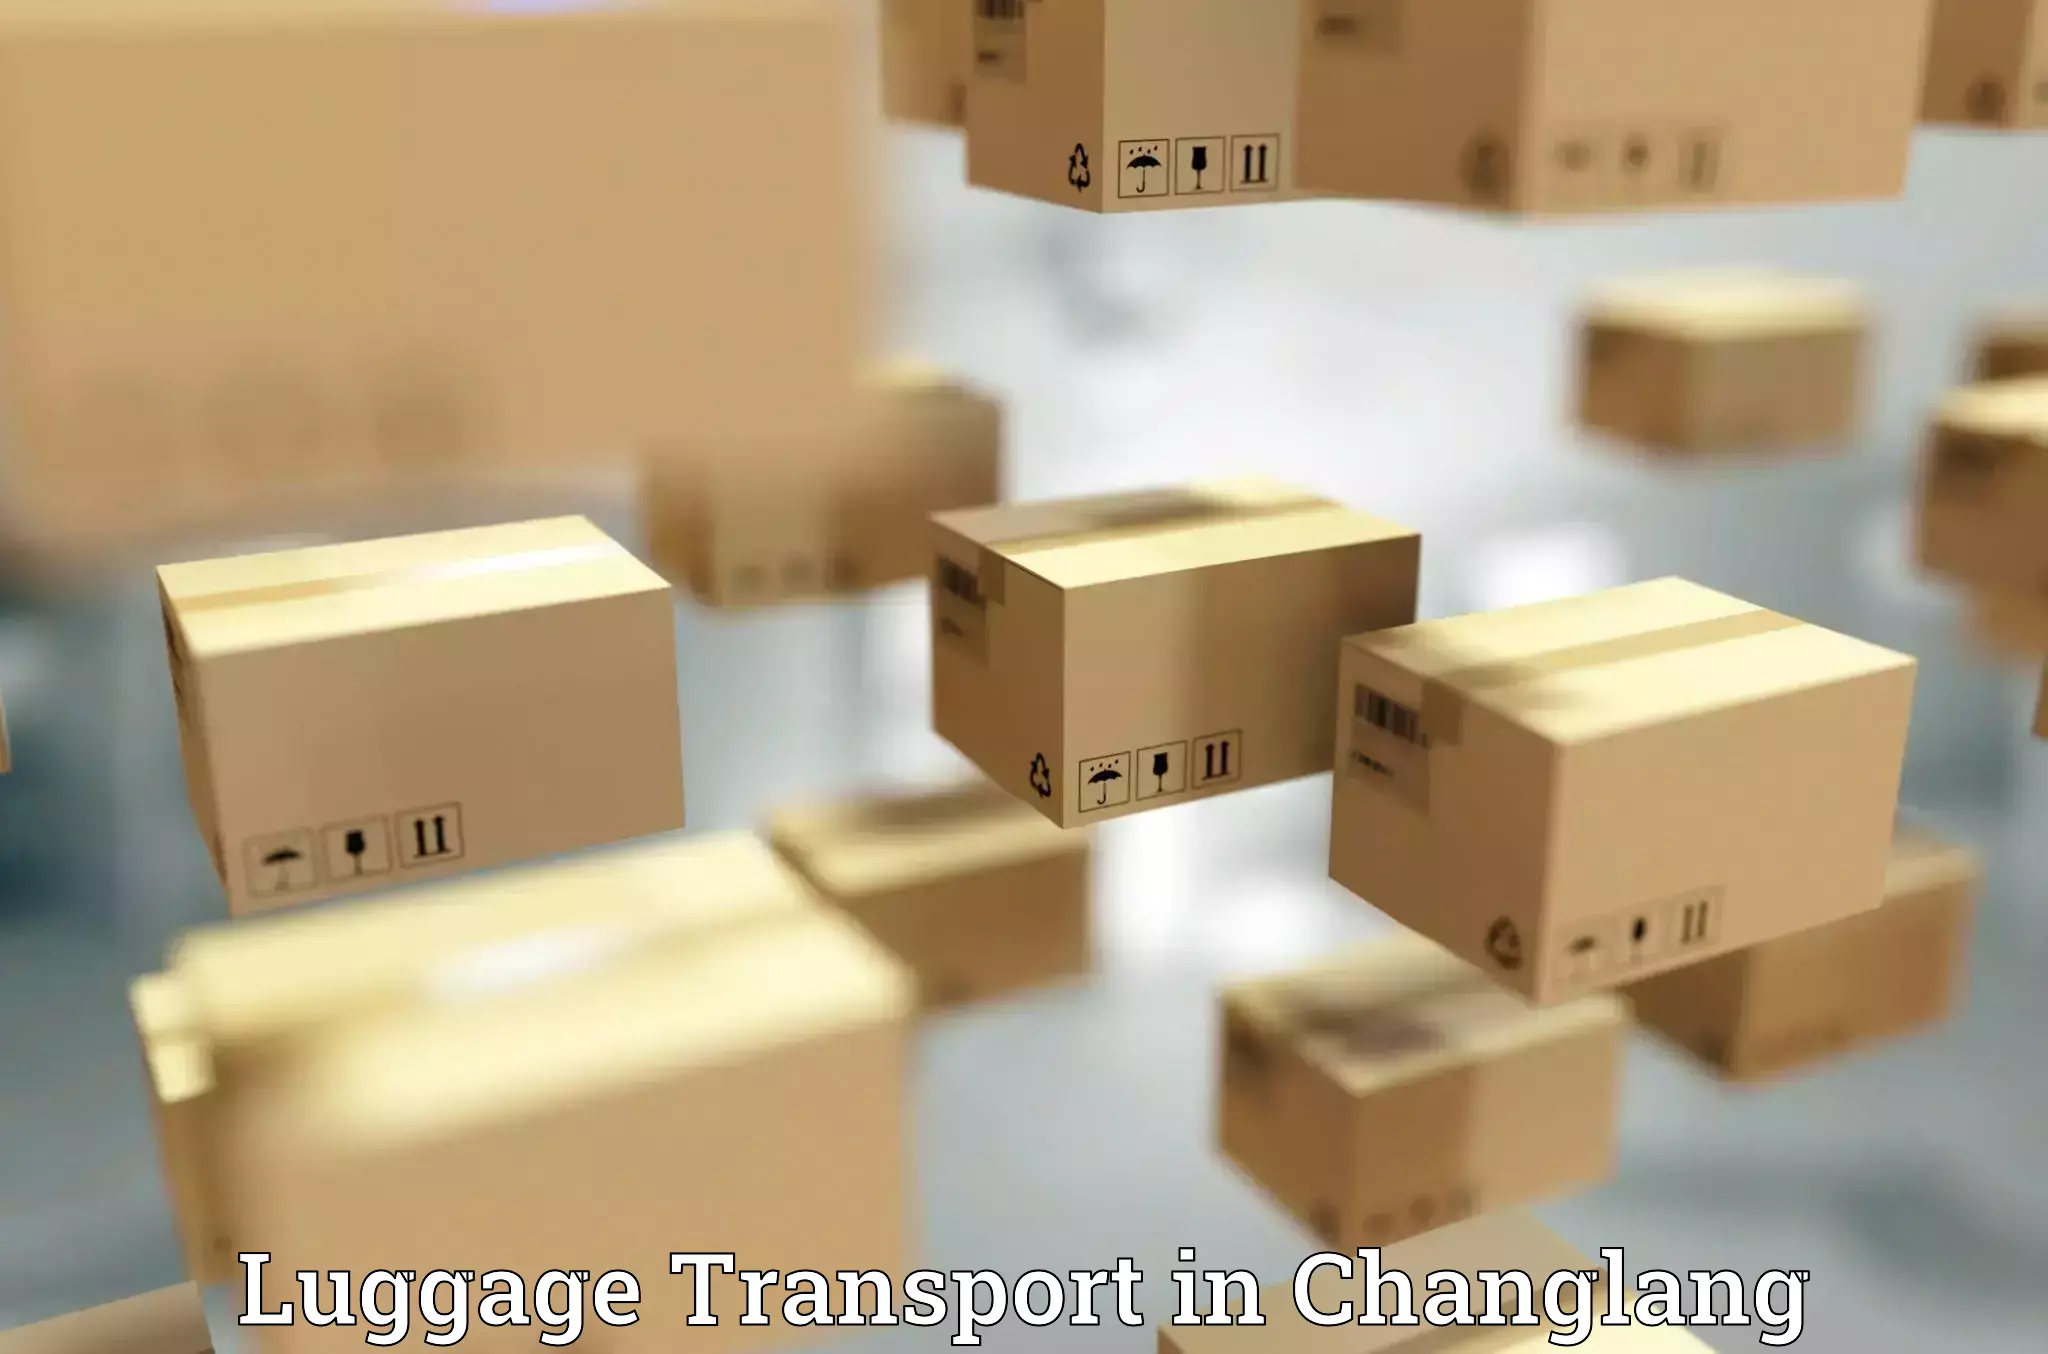 Customized luggage delivery in Changlang